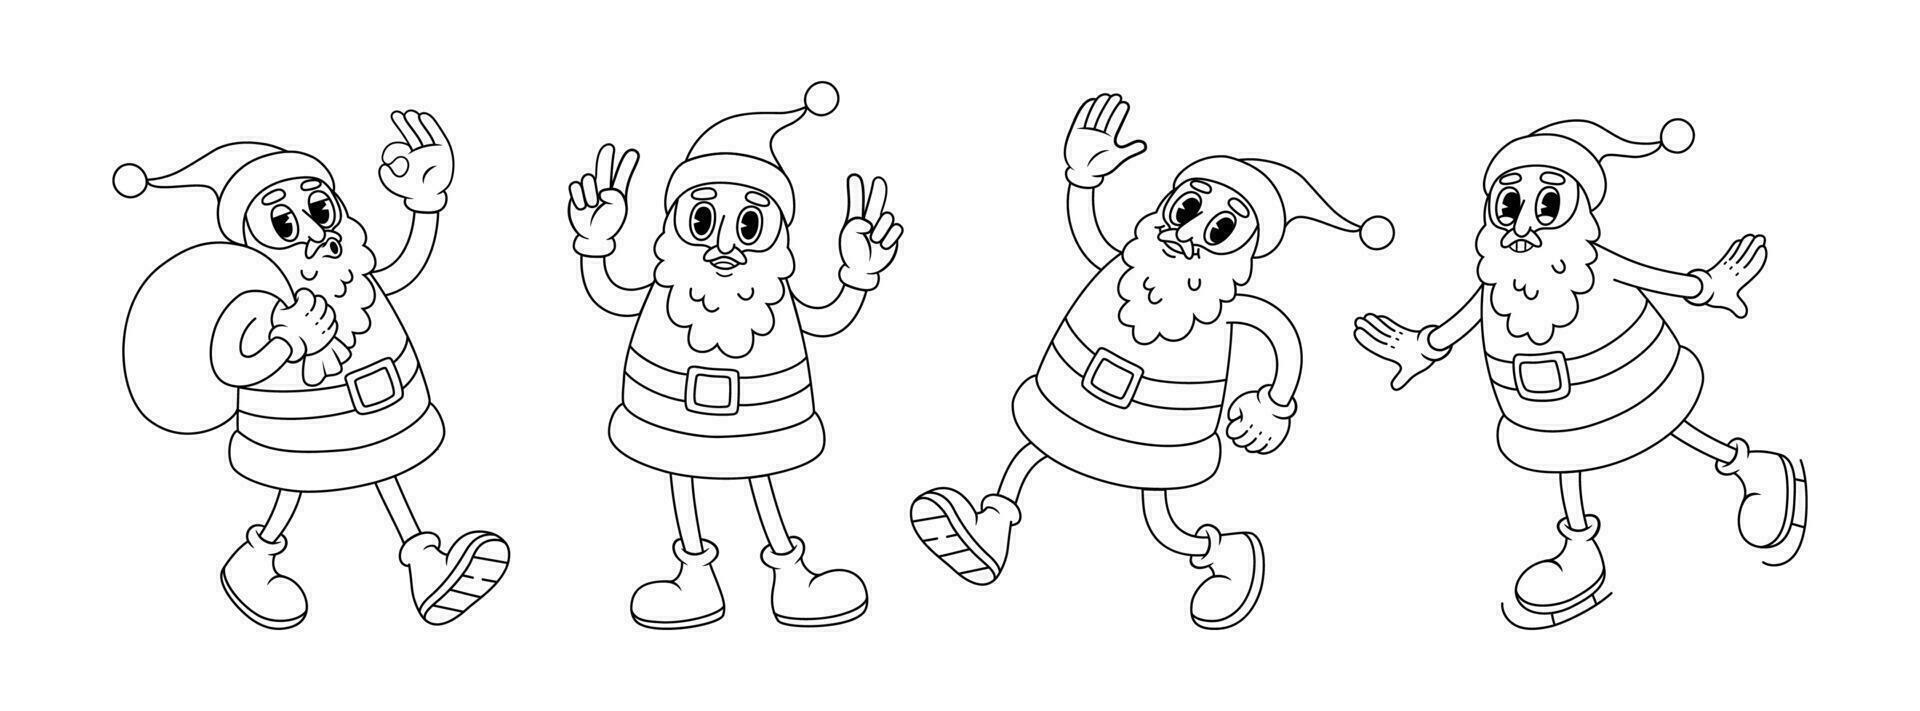 Funny Santa Claus in different poses. Groovy vector illustration in line style.